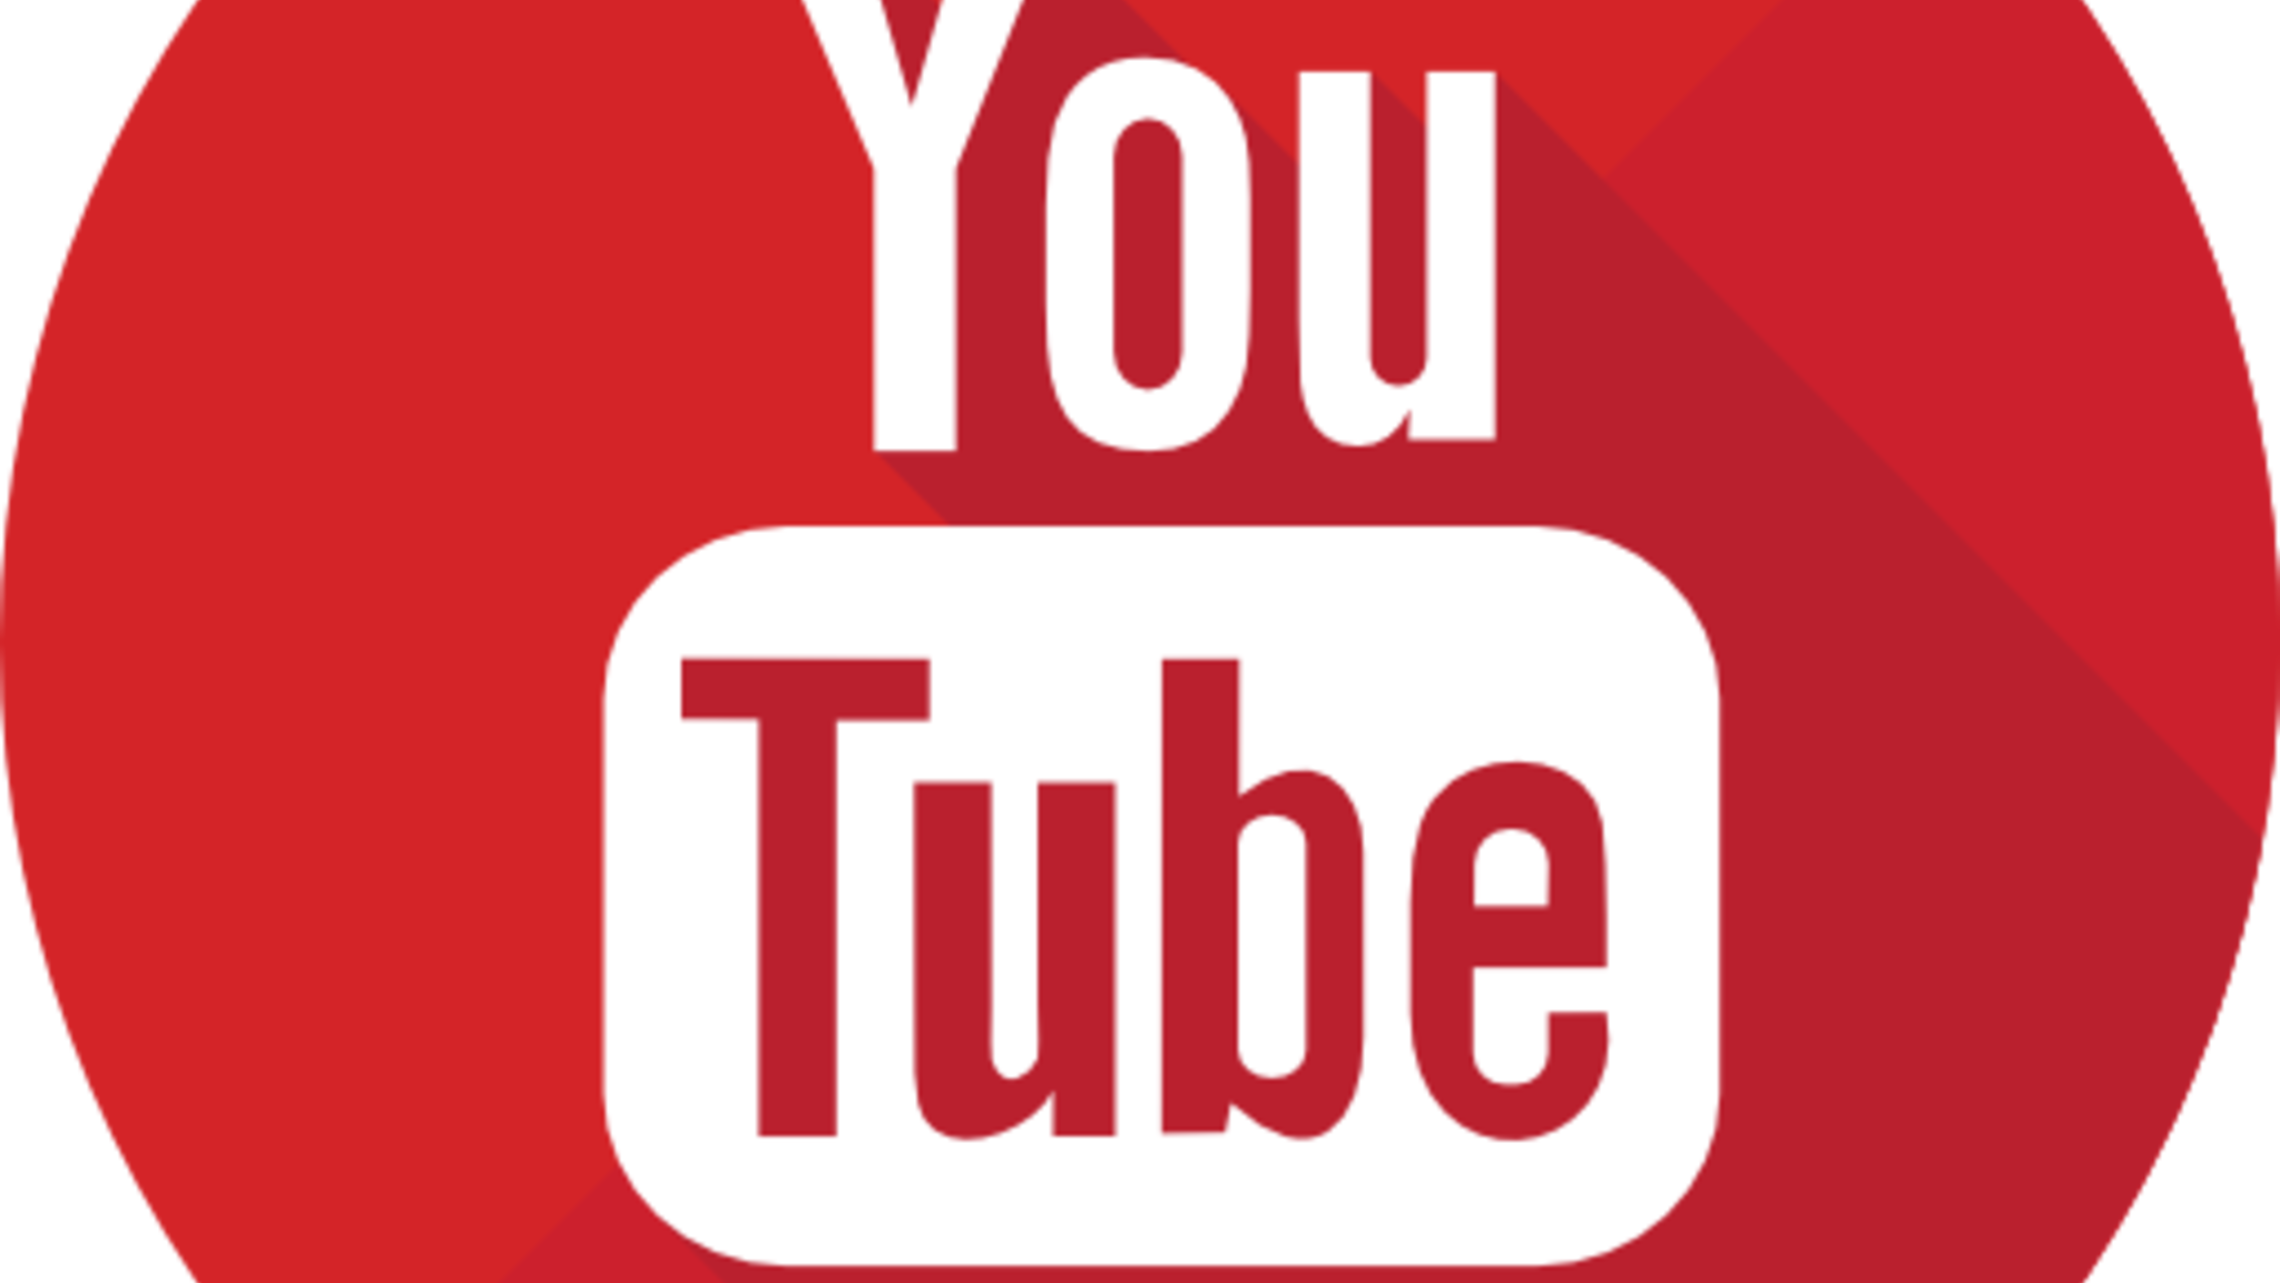 icon in red circle with white text reading "you tube"